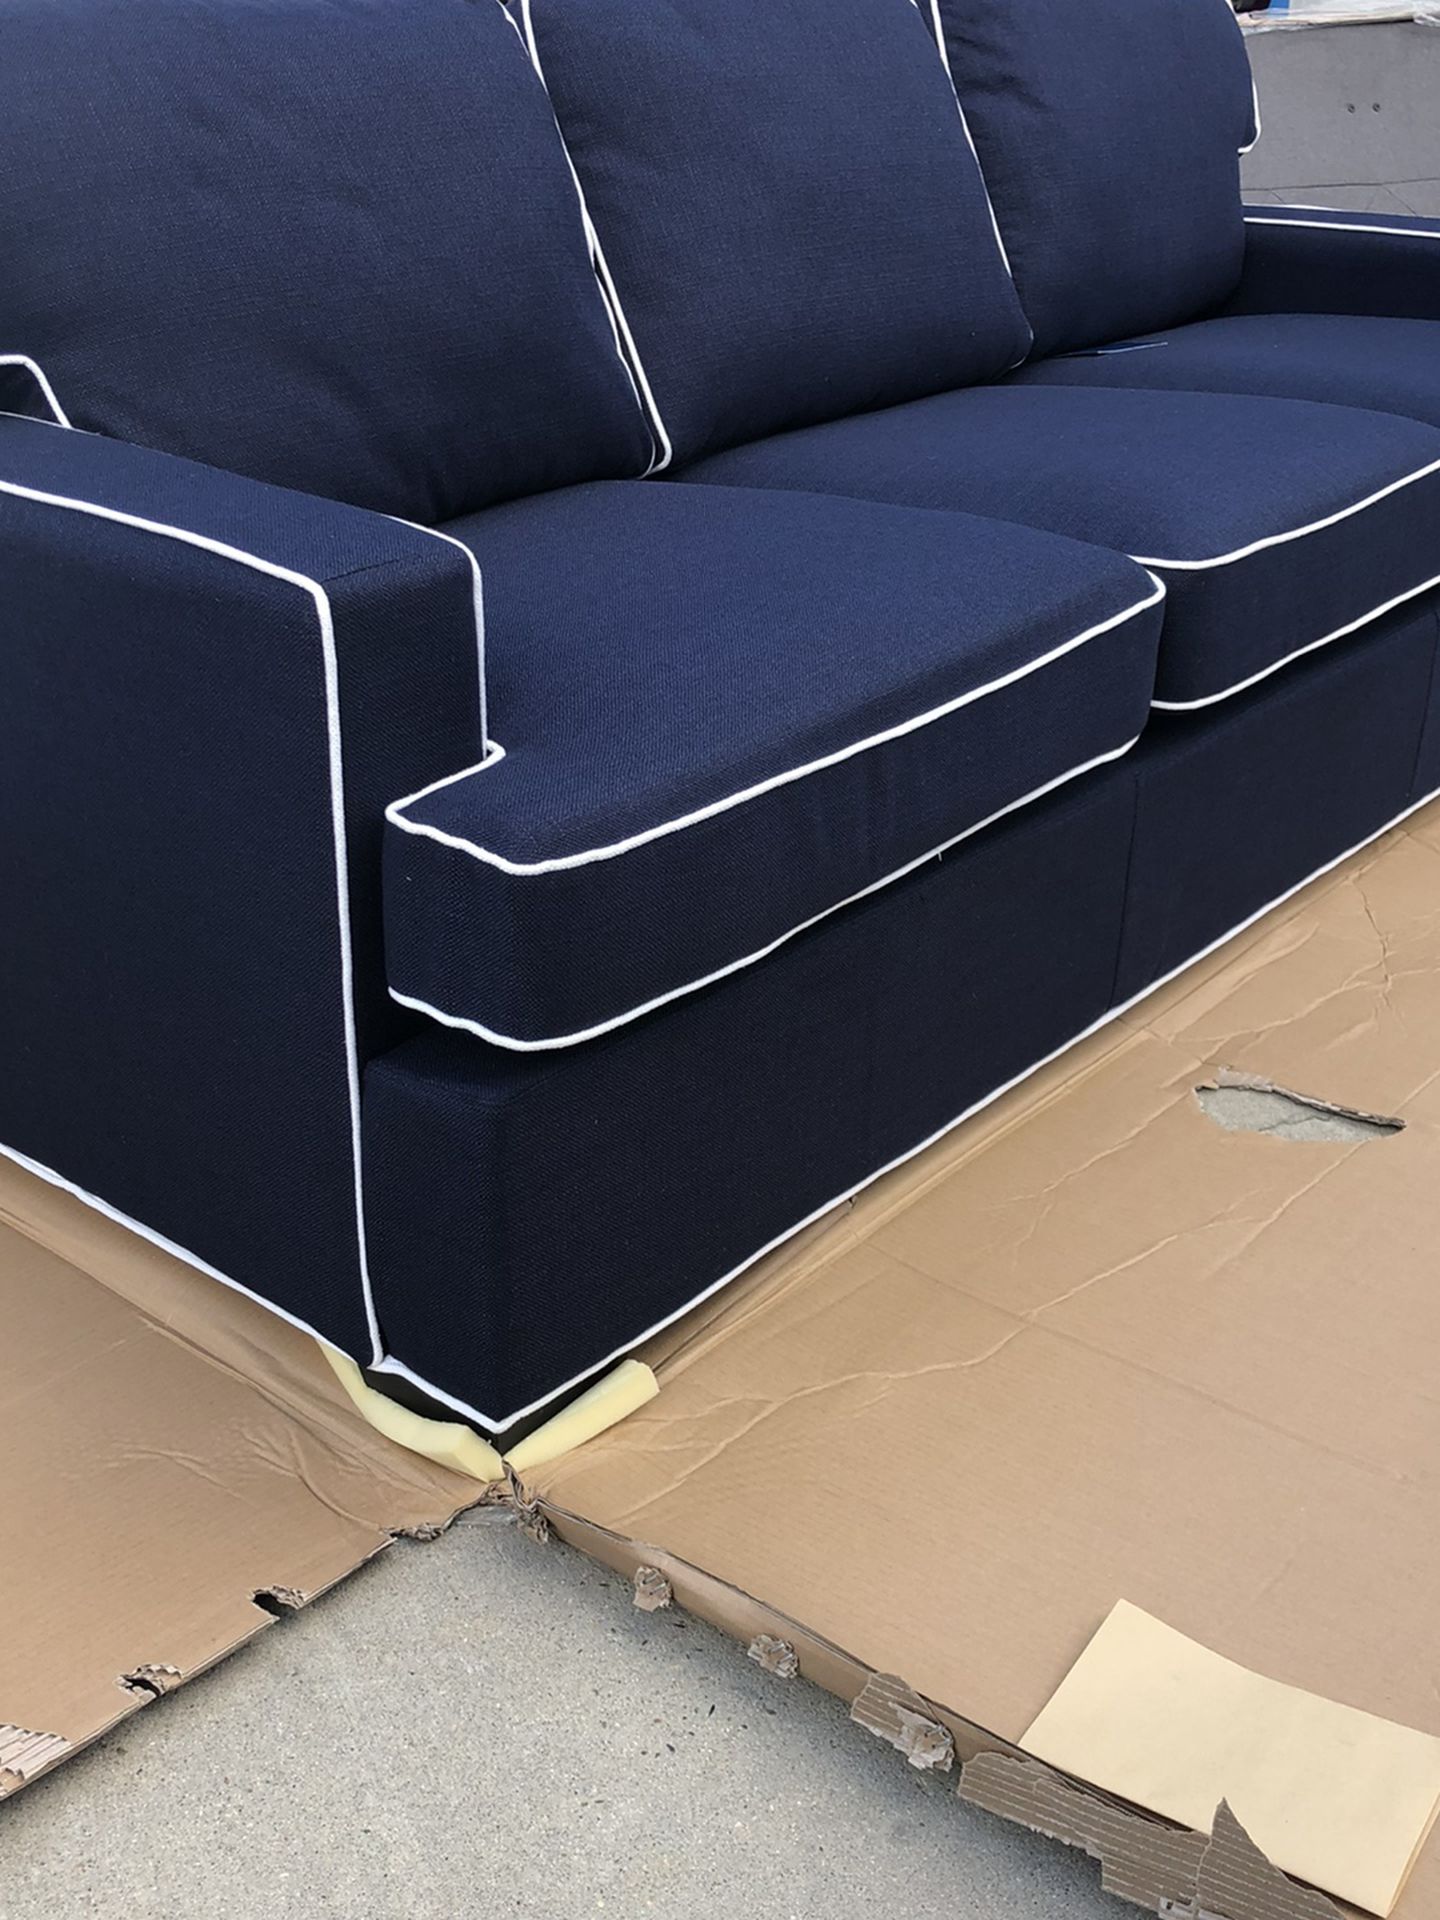 Brand New Tommy Hilfiger Sofa, Retails For Over $1000